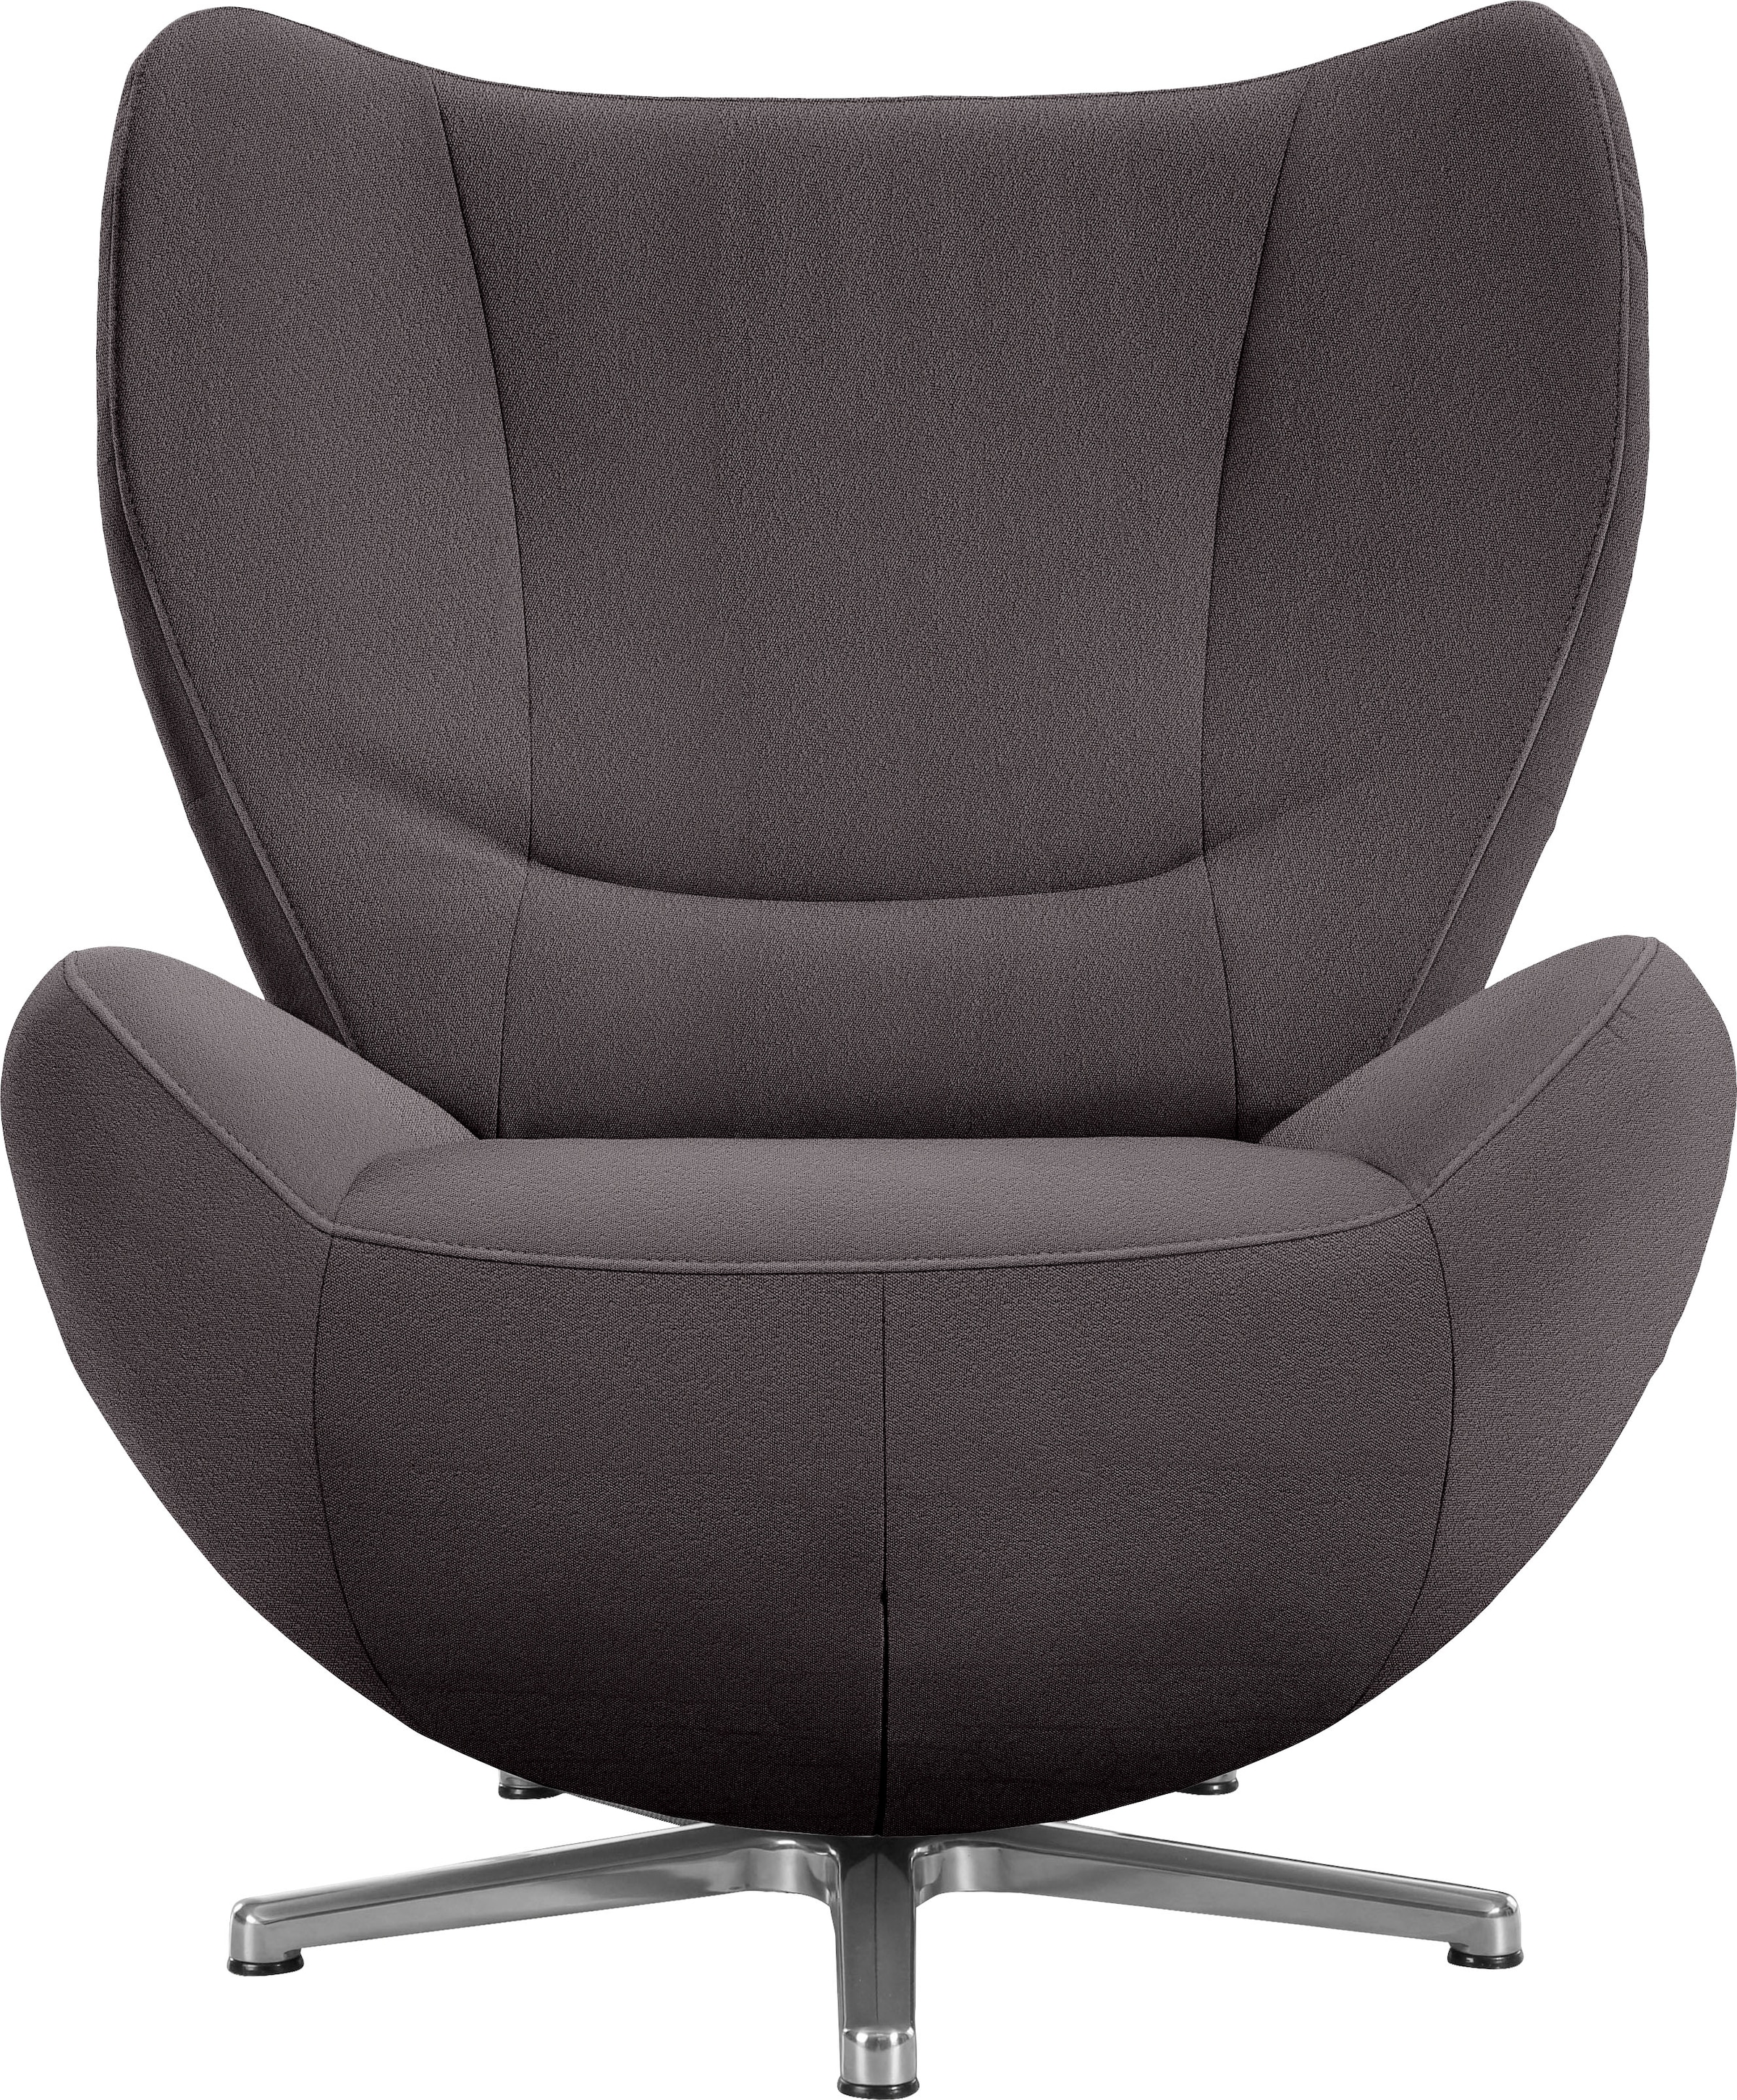 in »TOM HOME Metall-Drehfuß TAILOR mit Chrom BAUR Loungesessel TOM | PURE«,